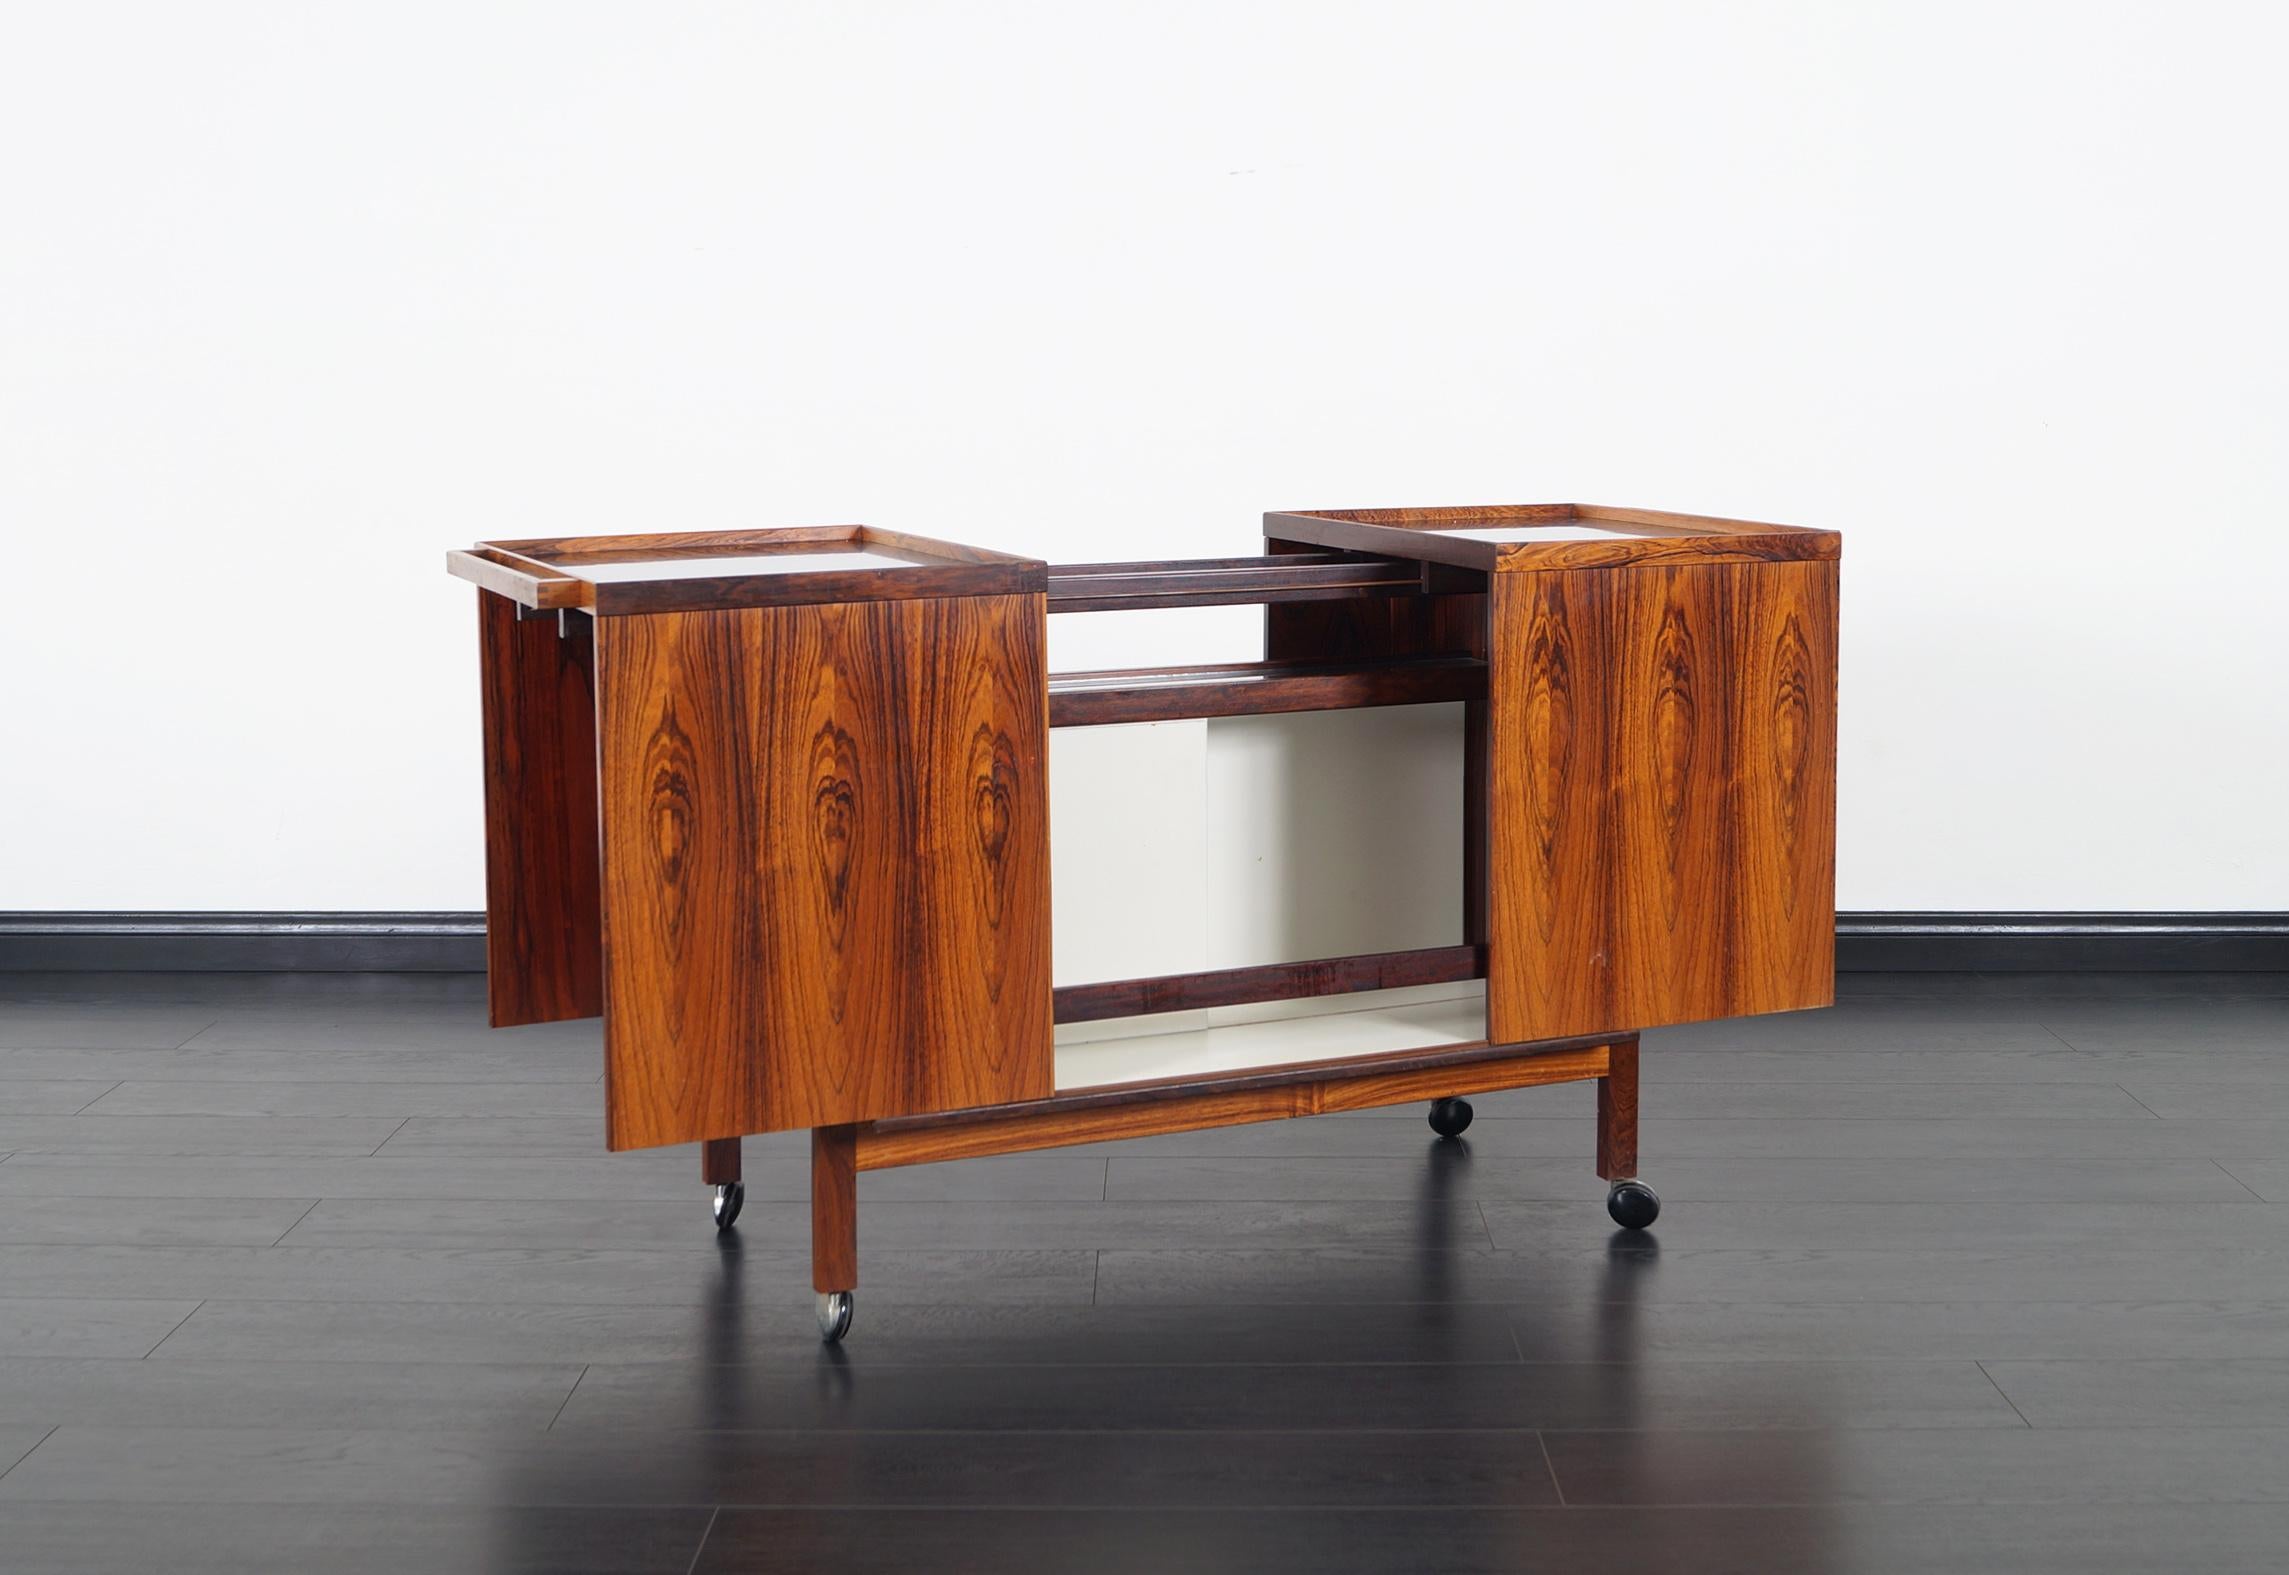 Fabulous Danish rosewood bar cart designed by Niels Erik Glasdam for Vantinge Mobelindustri. Features two sections that slides out to reveal a stylish interior. Inside you will find a glass shelf above bottles storage and white sliding dividers. A